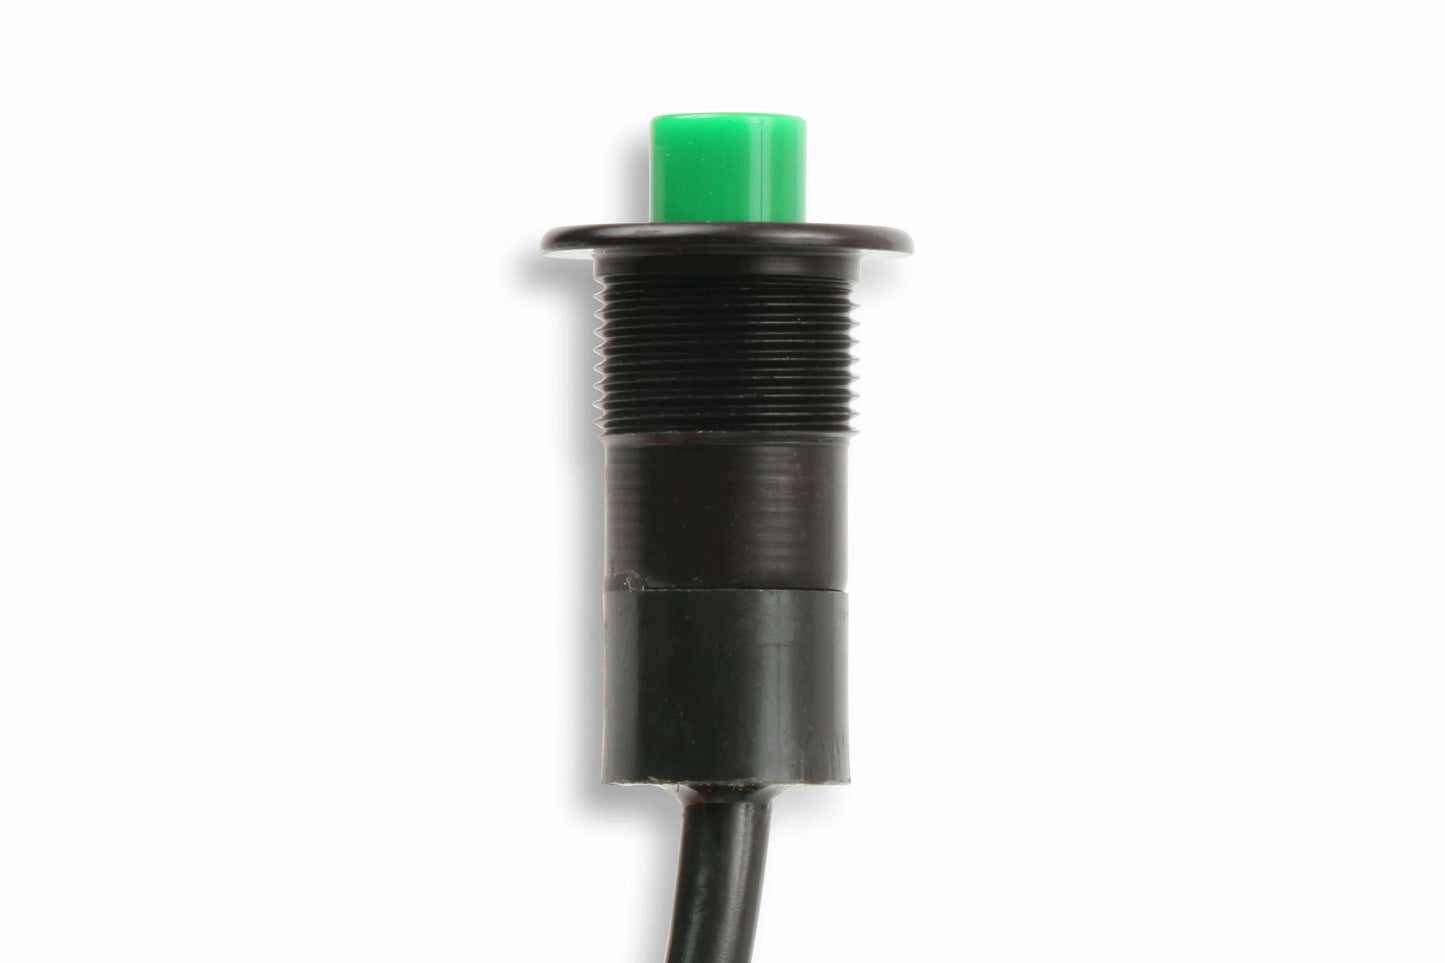 B&M Momentary Switch - Green Button - 46003